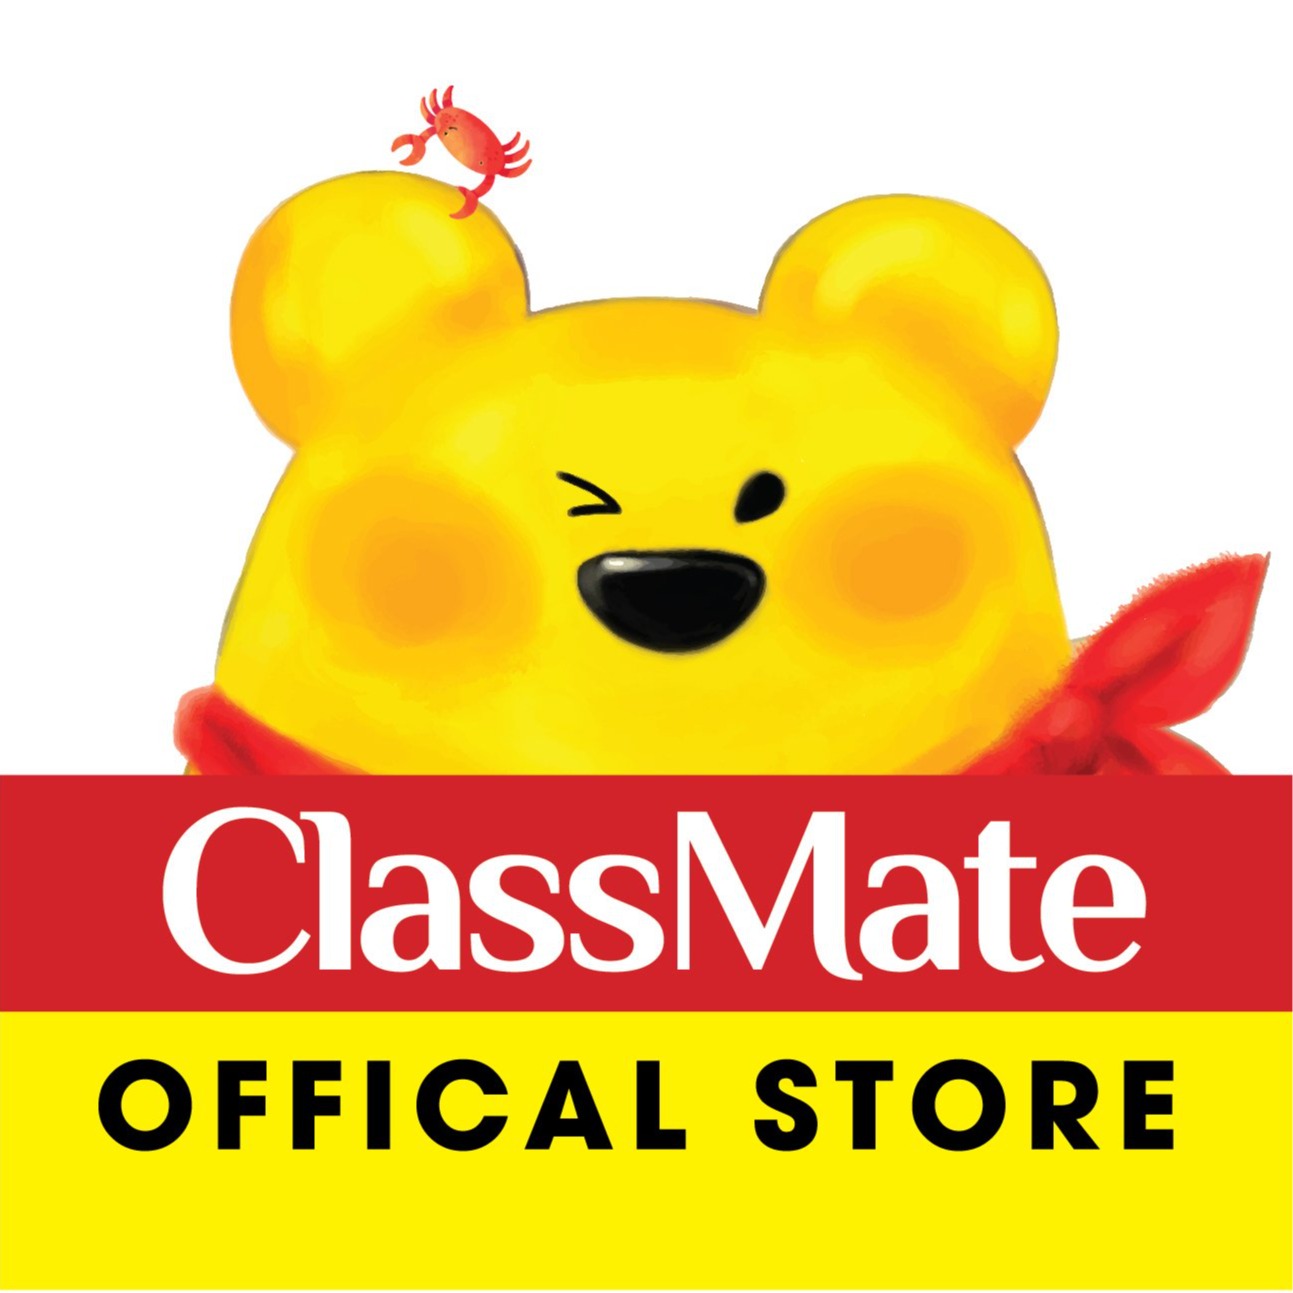 Classmate Official Store